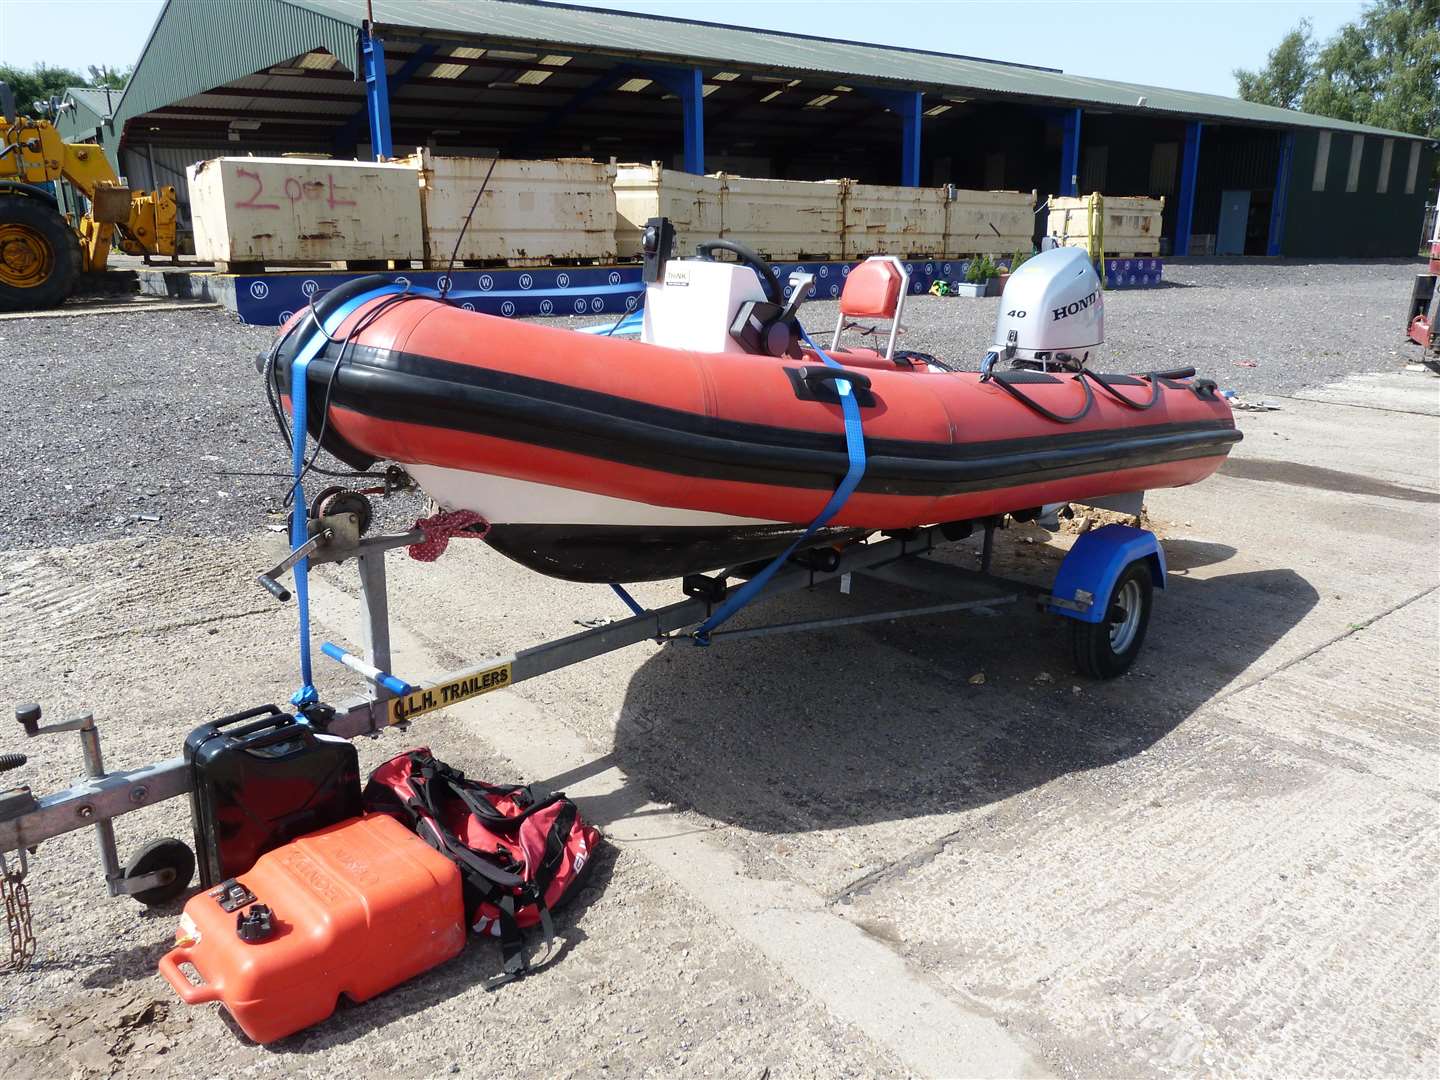 The boat intercepted at Walmer. Picture: Eastern Region Special Operations Unit